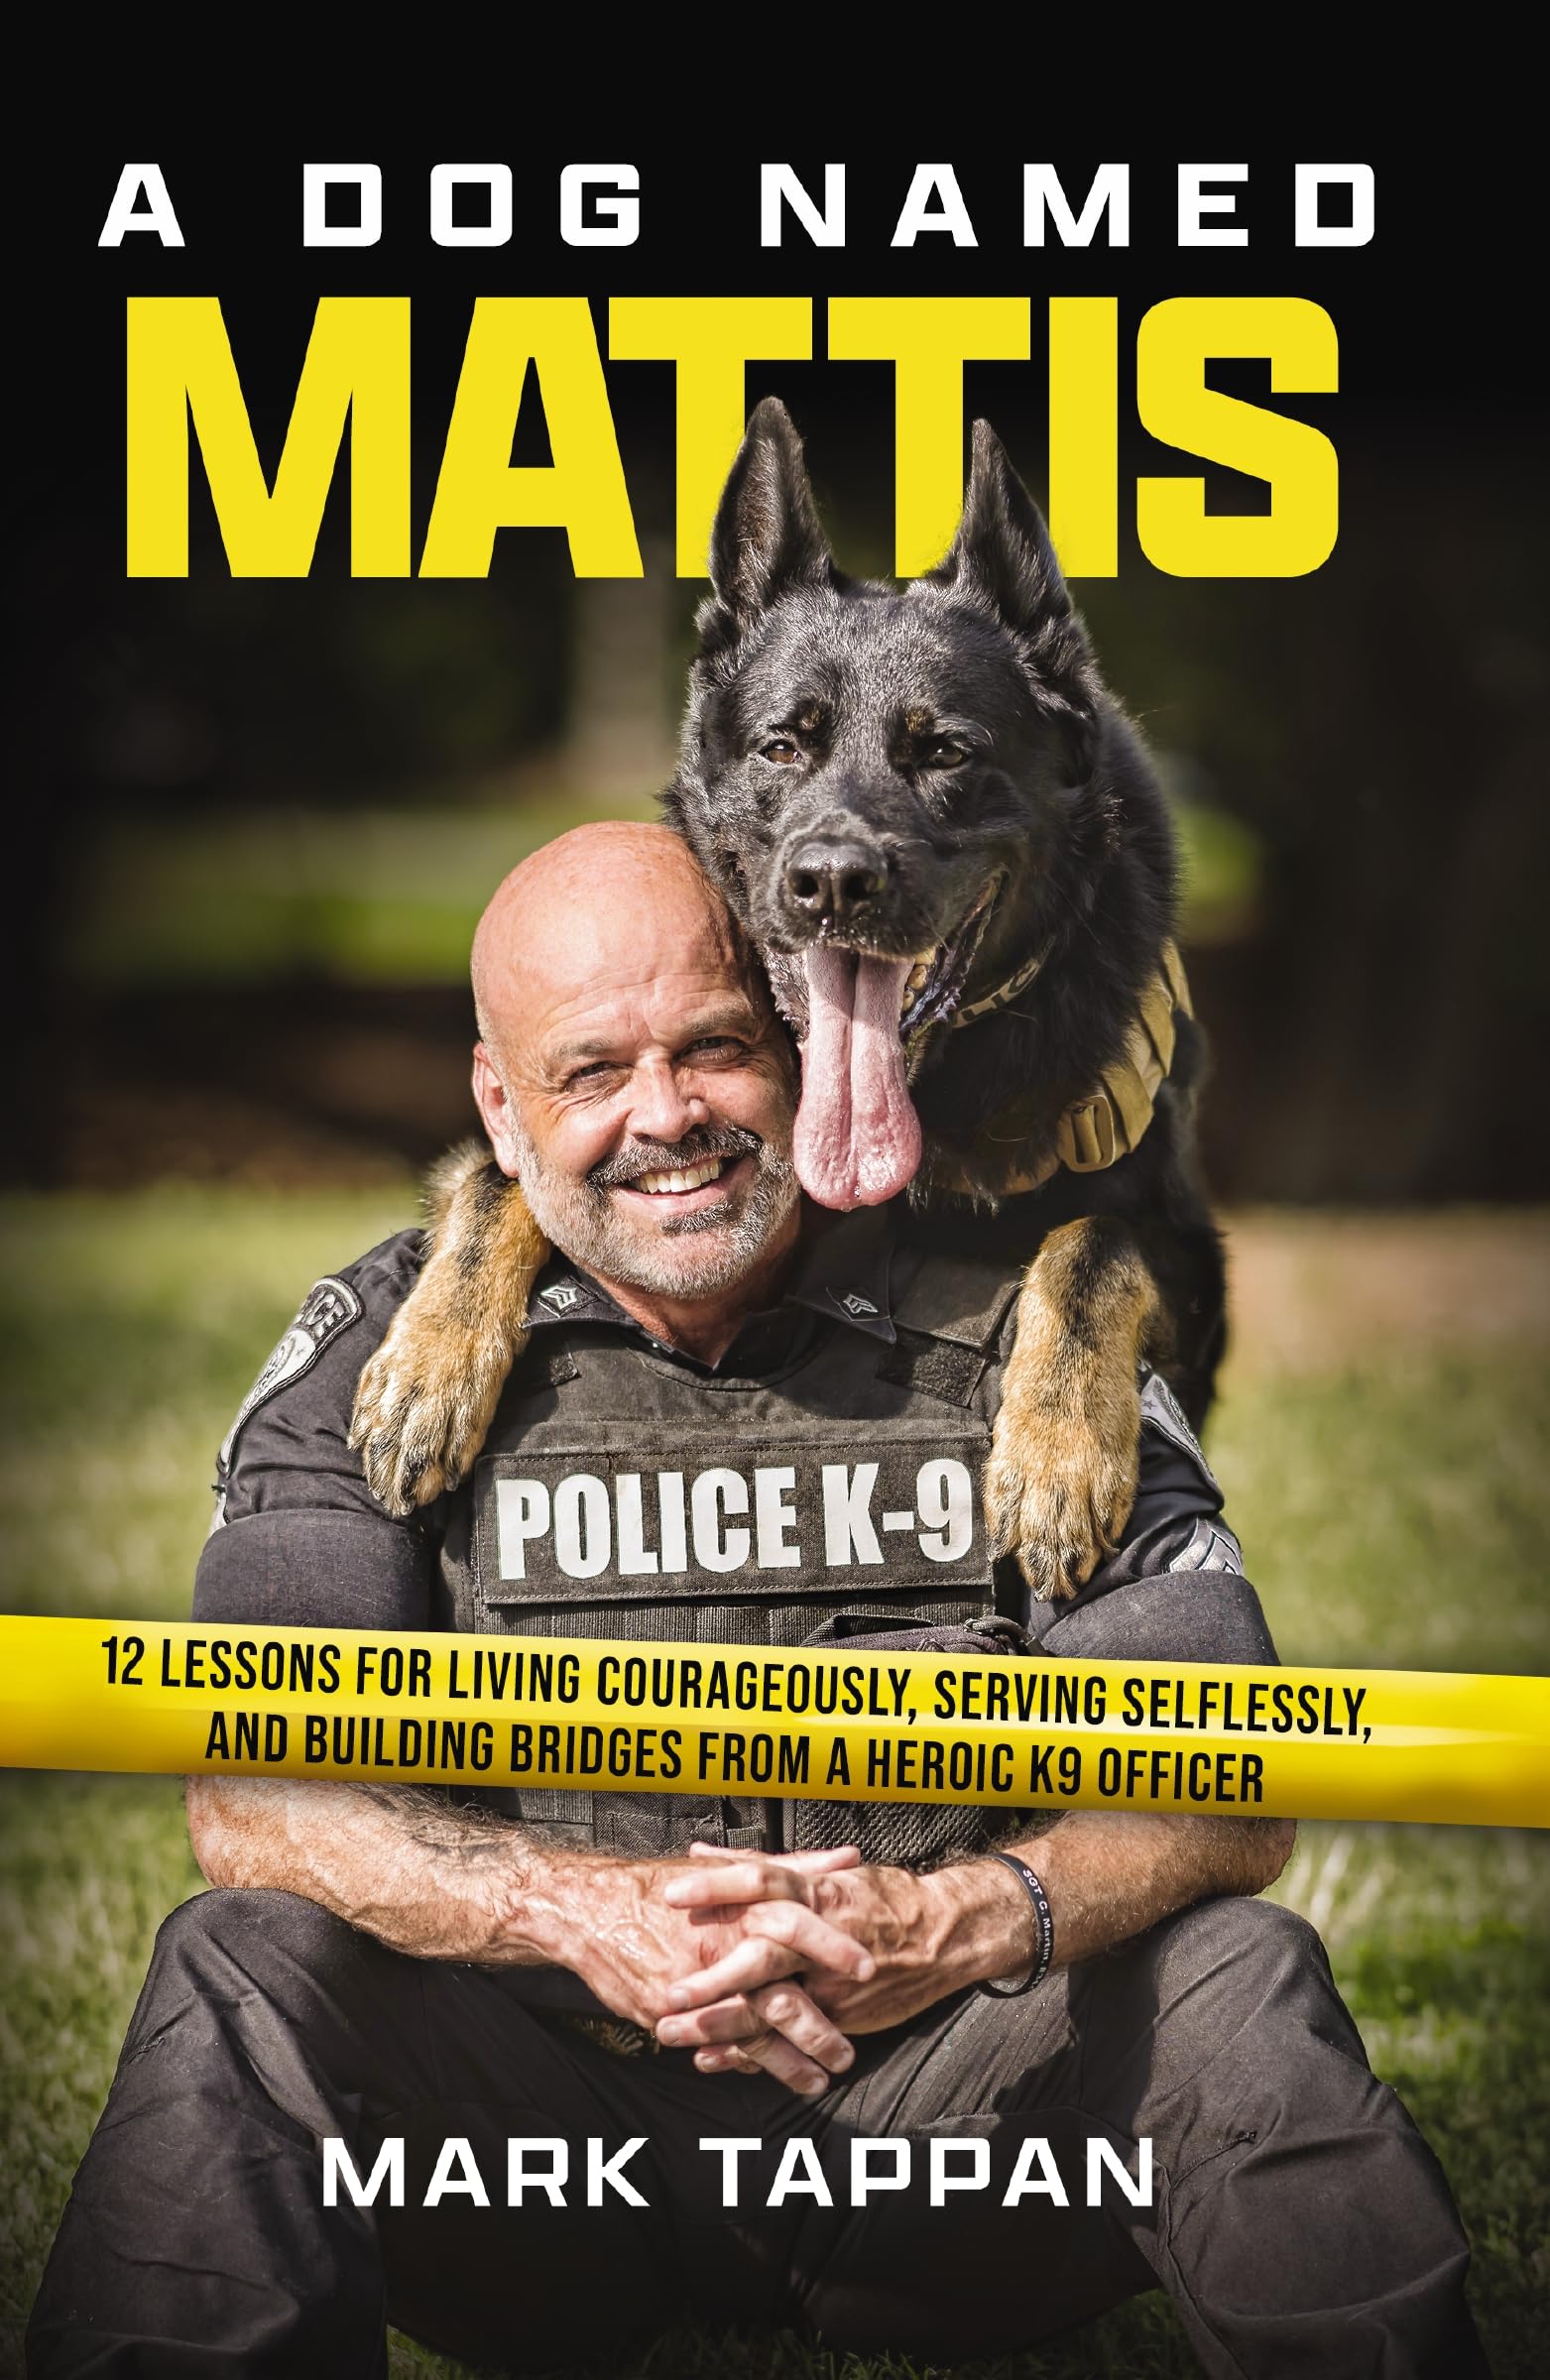 A Dog Named Mattis: 12 Lessons for Living Courageously, Serving Selflessly, and Building Bridges from a Heroic K9 Officer by Tappan, Mark